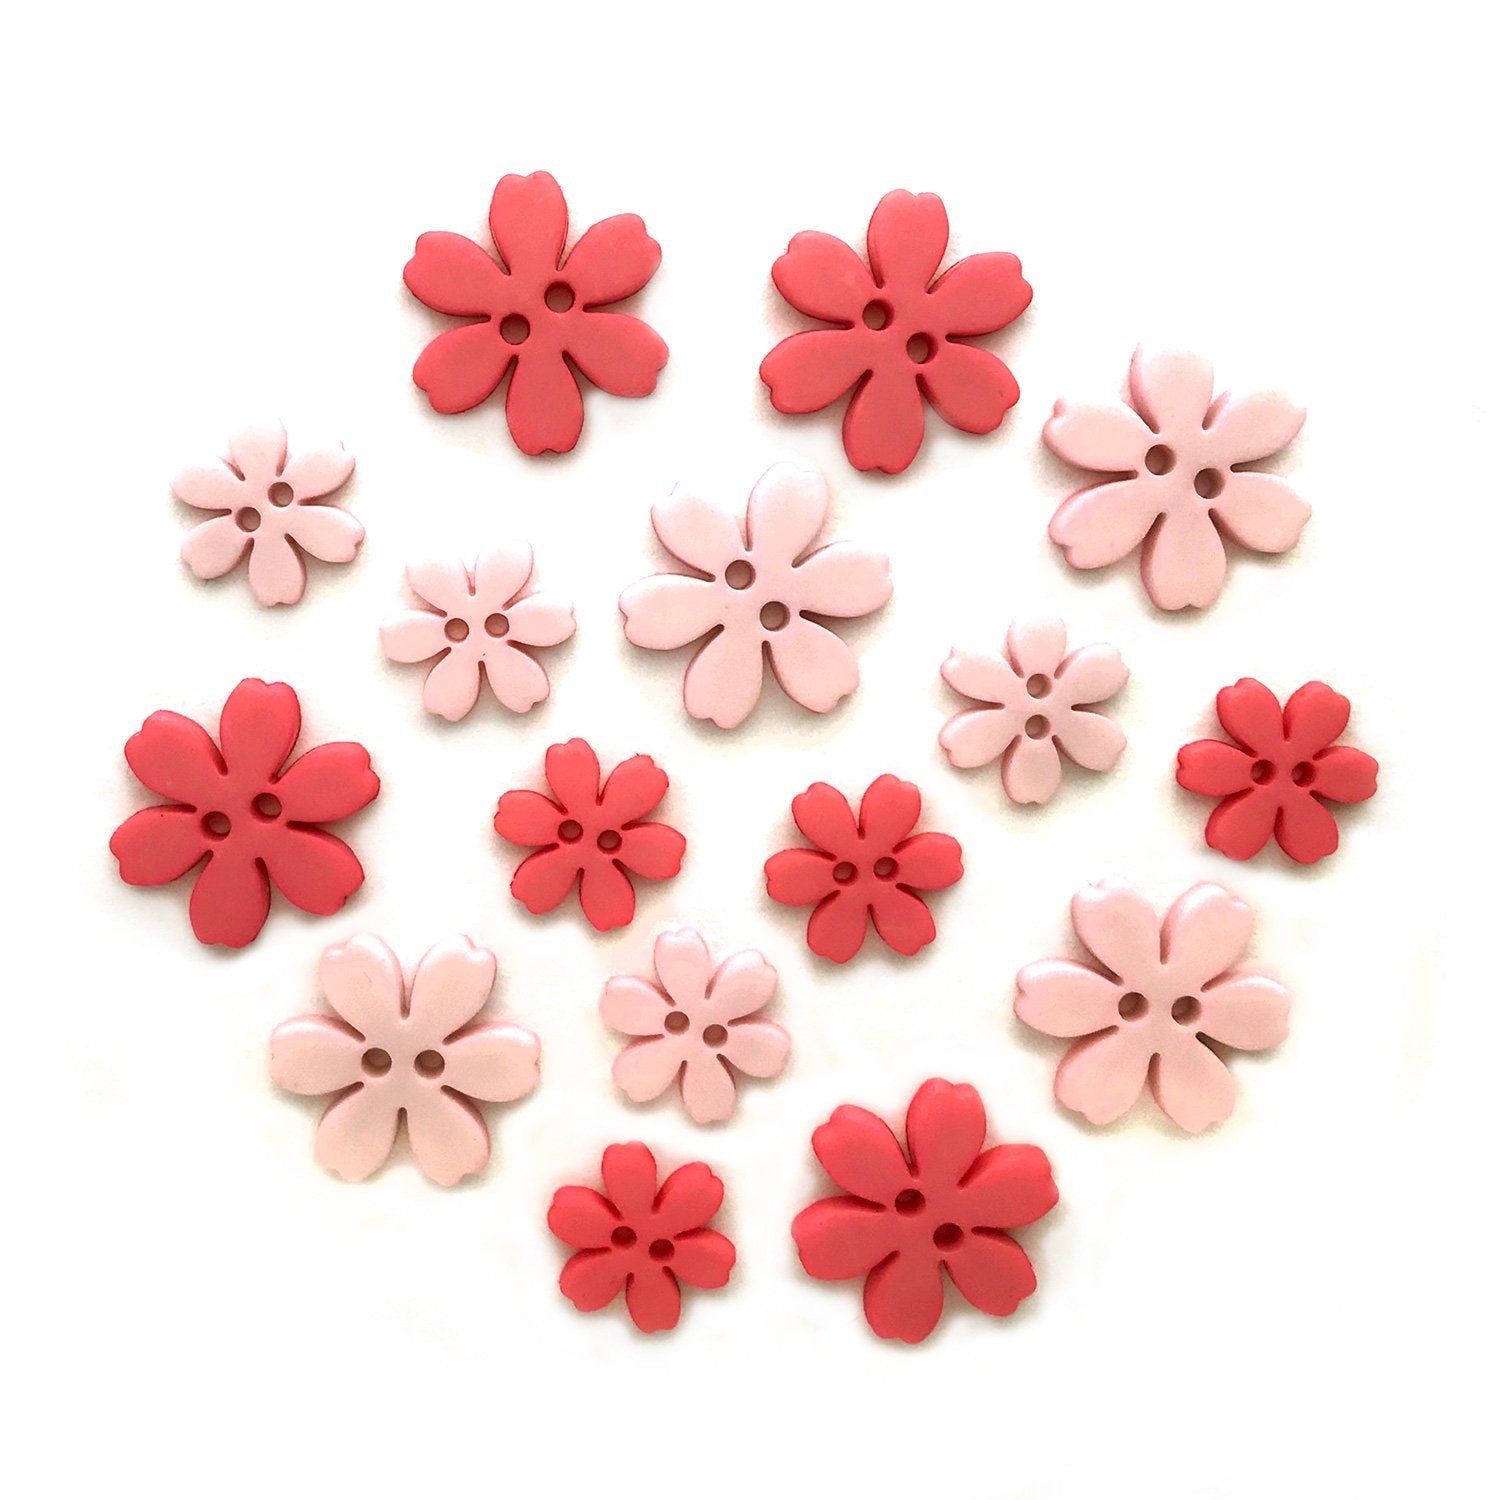  VILLCASE Pack Flower Wood Buttons Upholstery Buttons Flower  Buttons for Crafts Buttons Scrabooking Wood Craft Button Heart Buttons  Sewing DIY Craft Button Bamboo Decorate Heart-Shaped